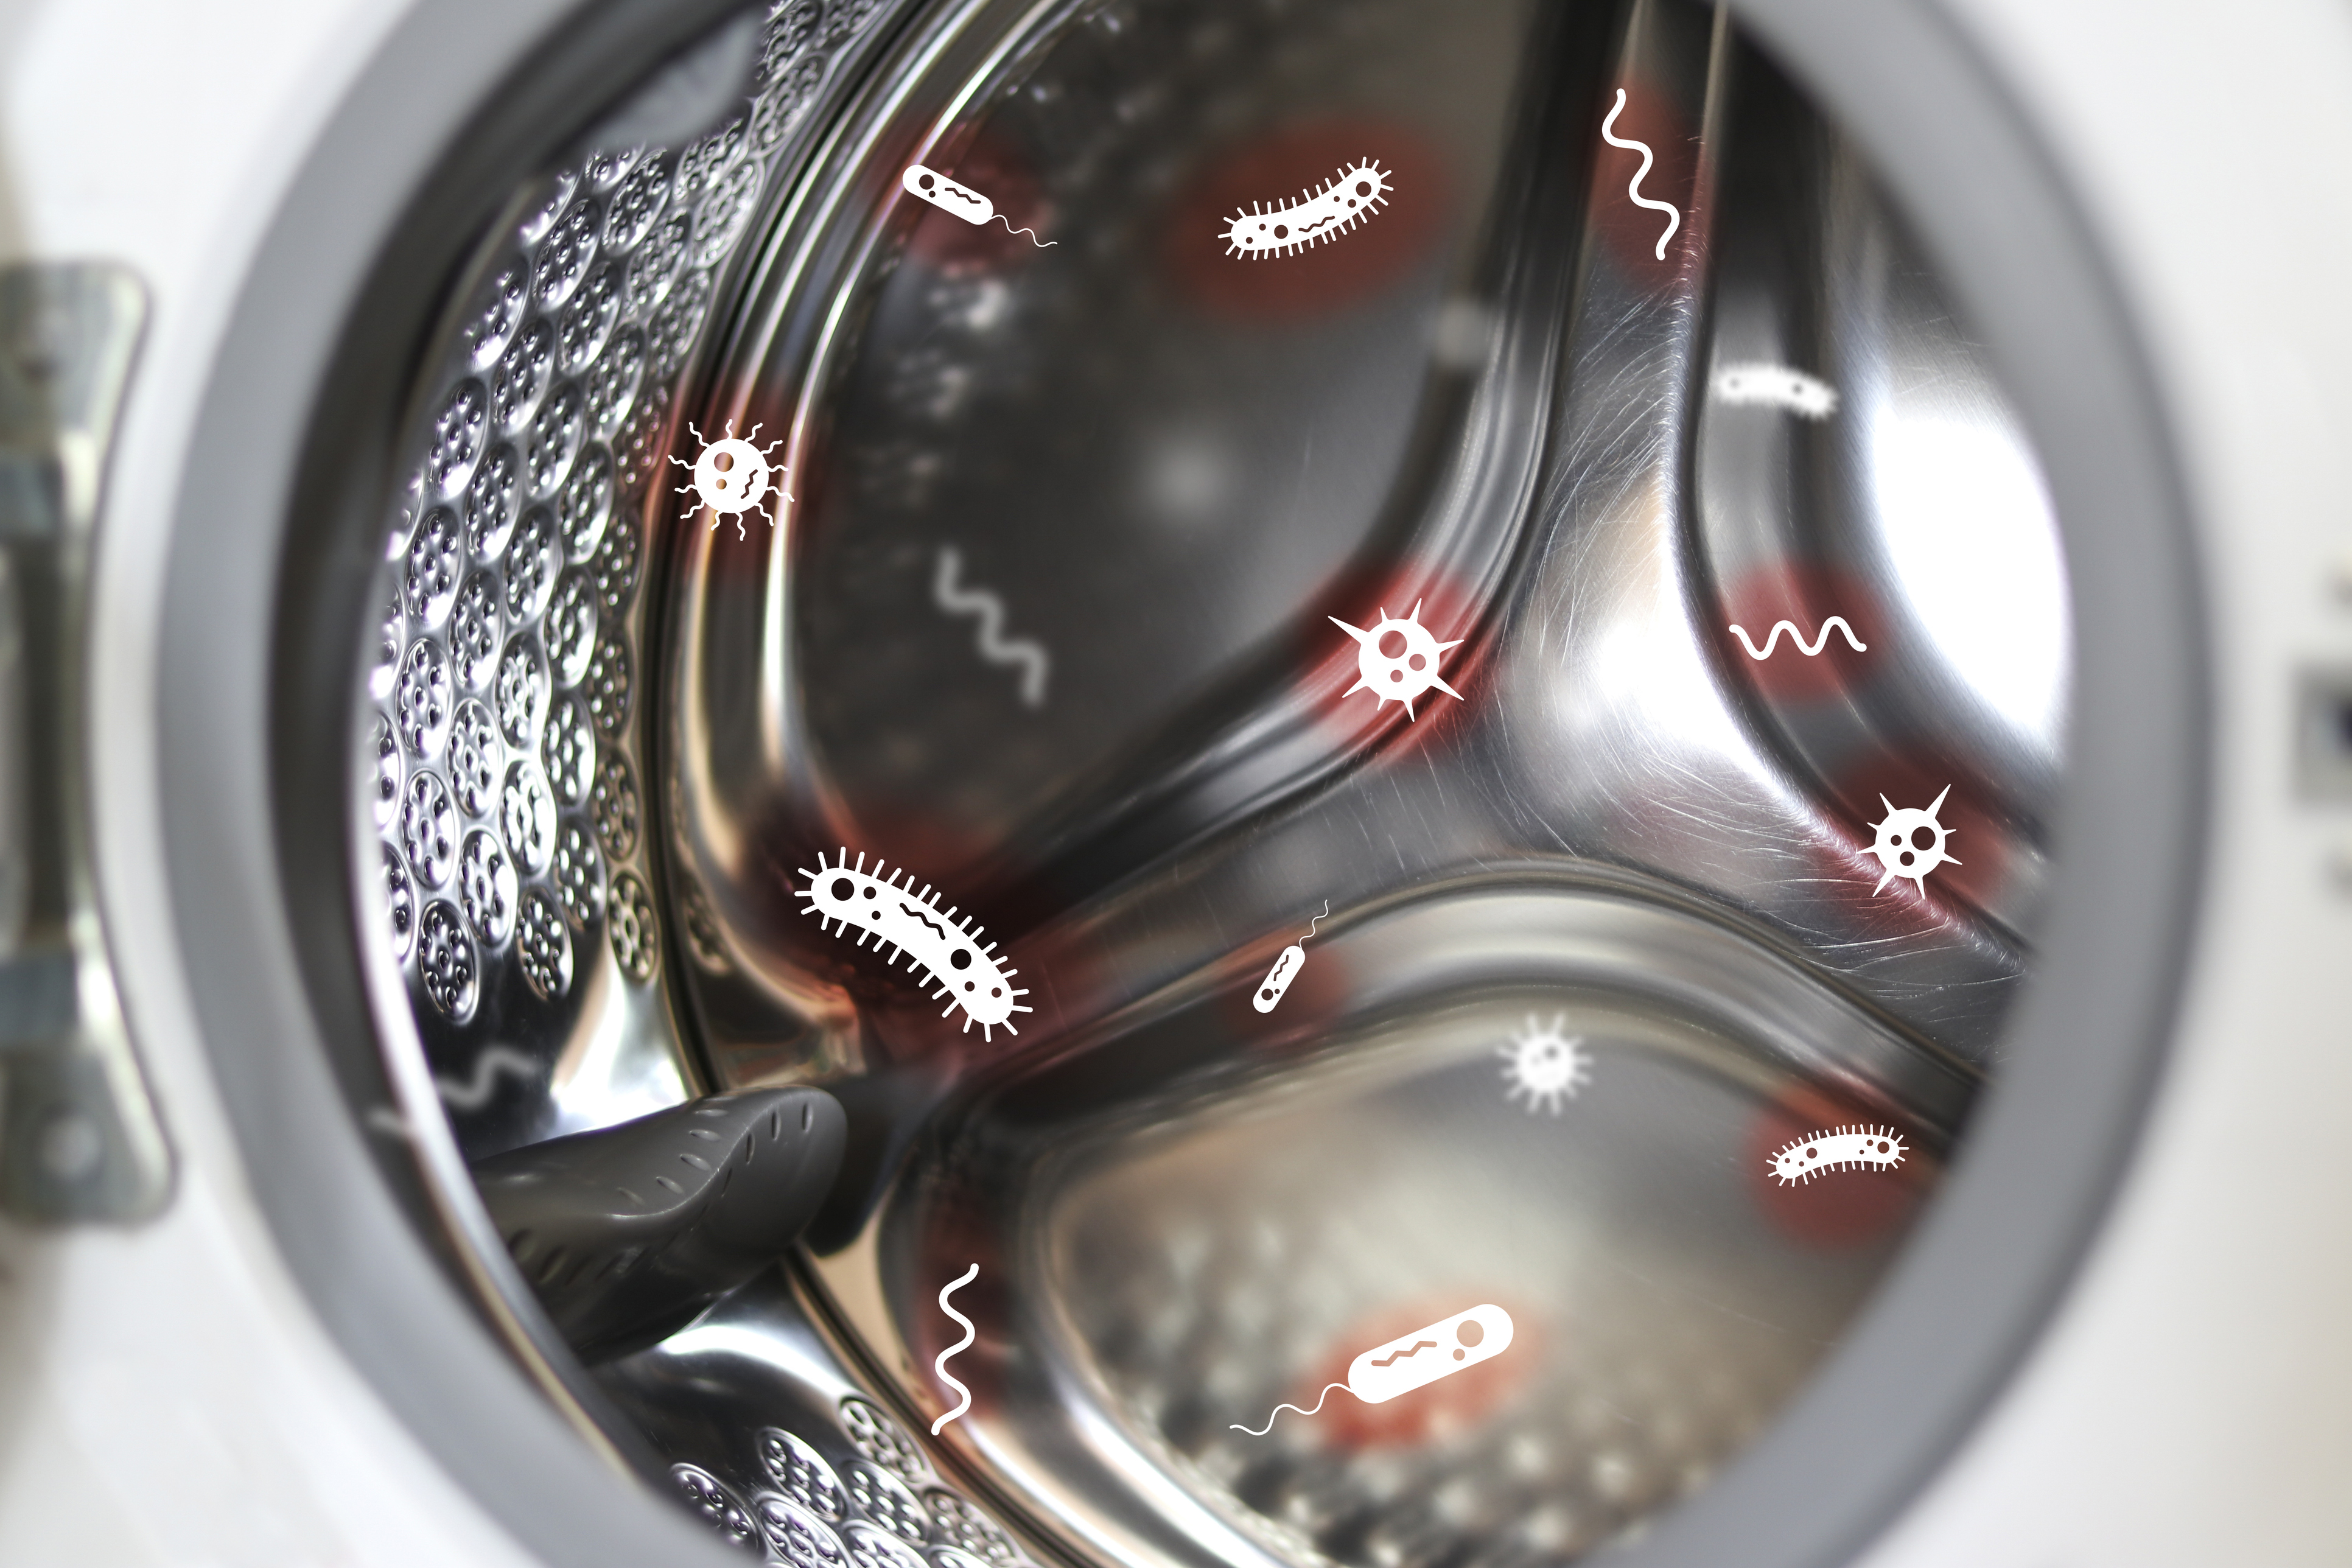 graphic depiction of bacteria on the drum of front load washing machine